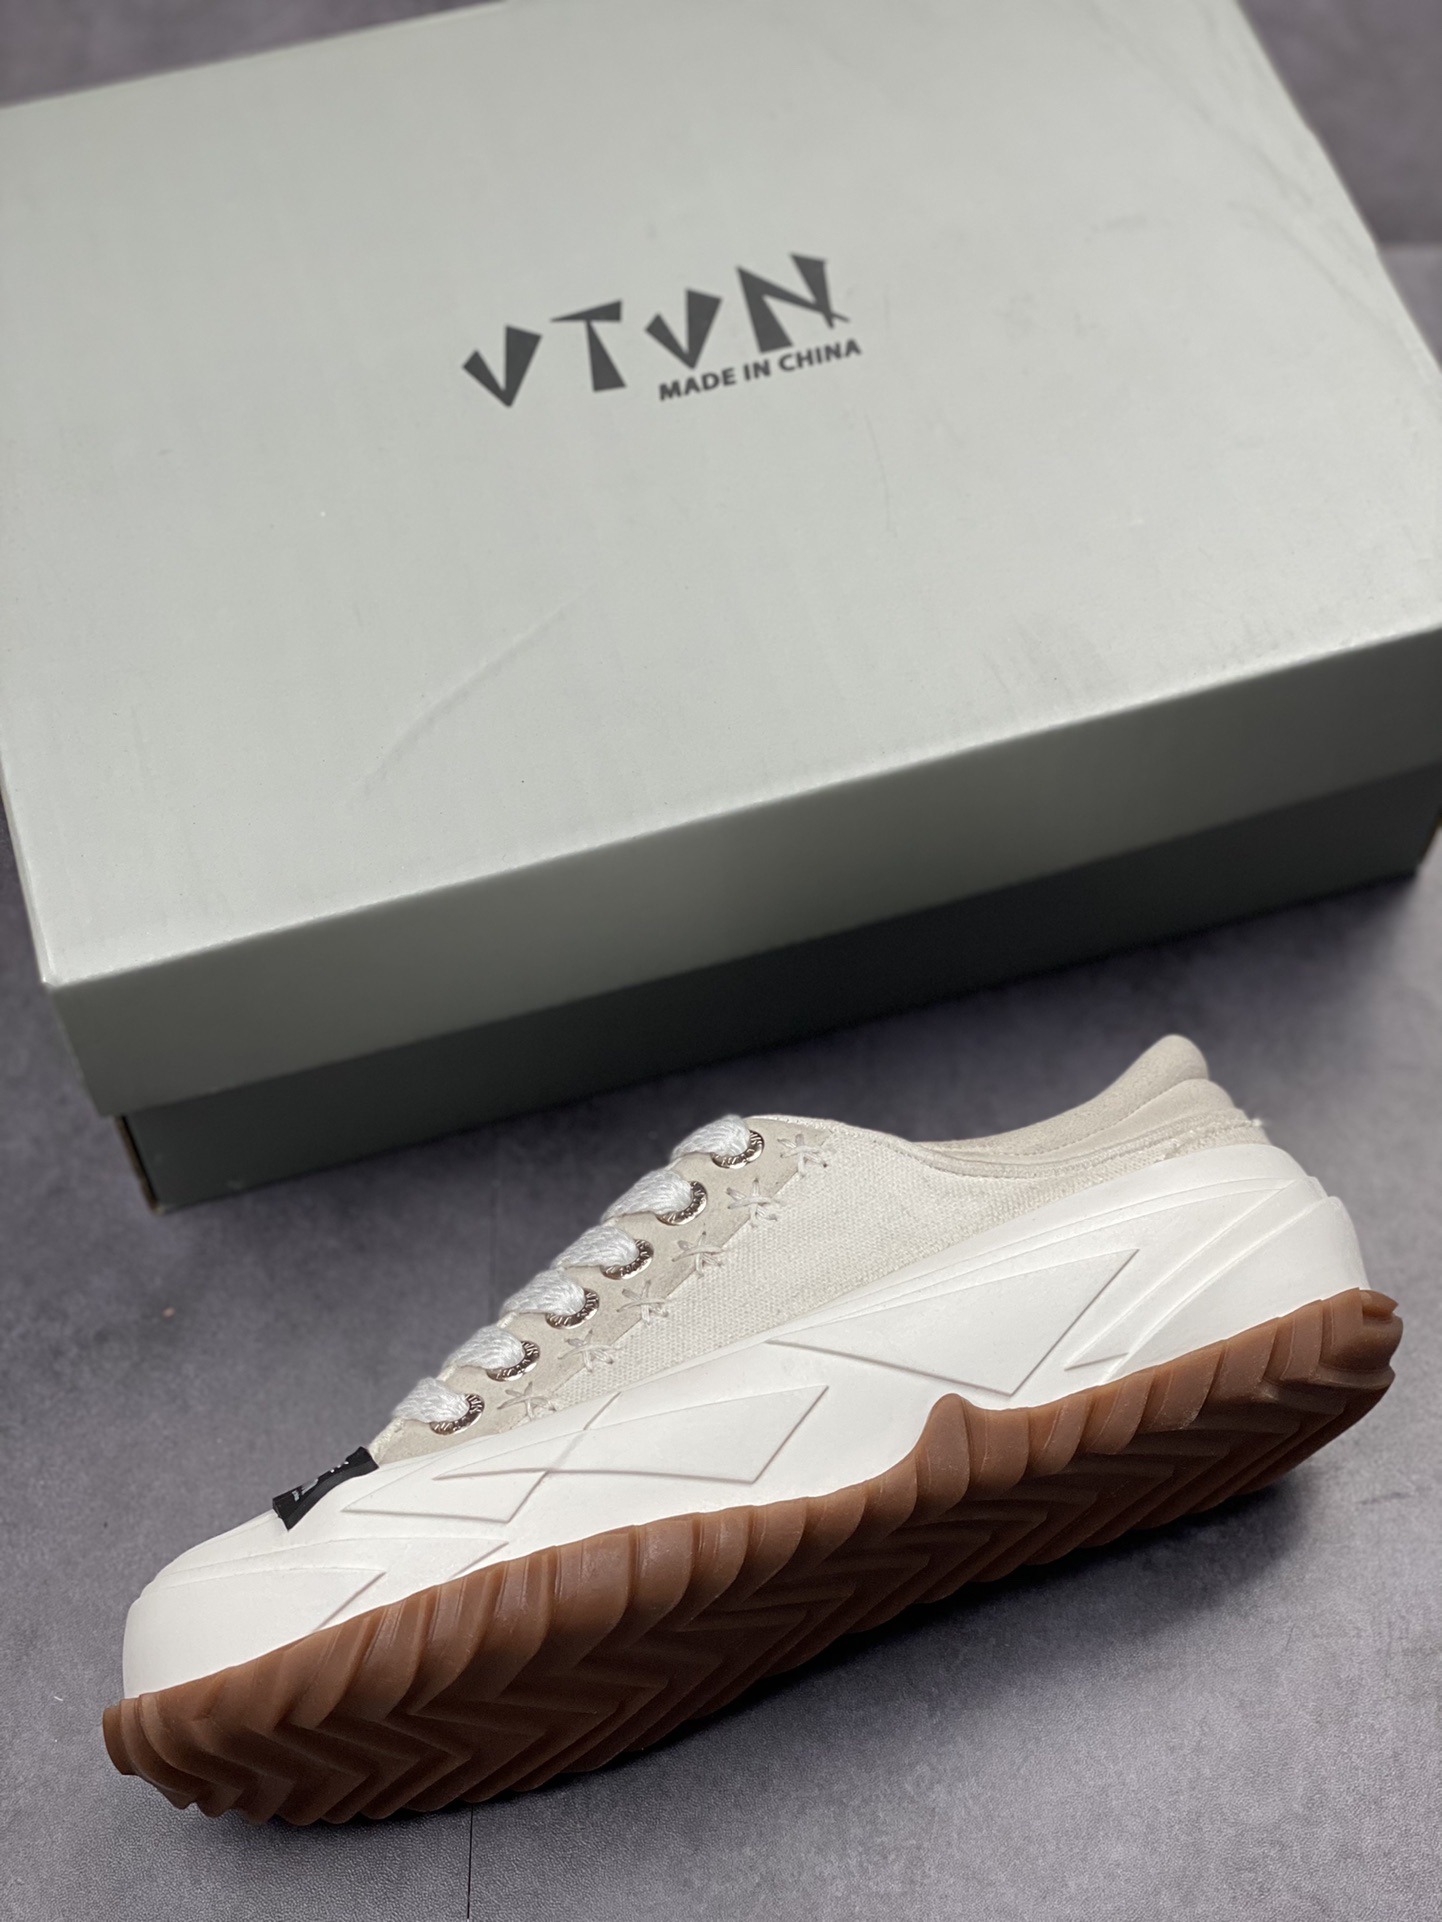 VTVN 2023 spring and summer new bread shoes VTVN gives up the rock punk style in the new season